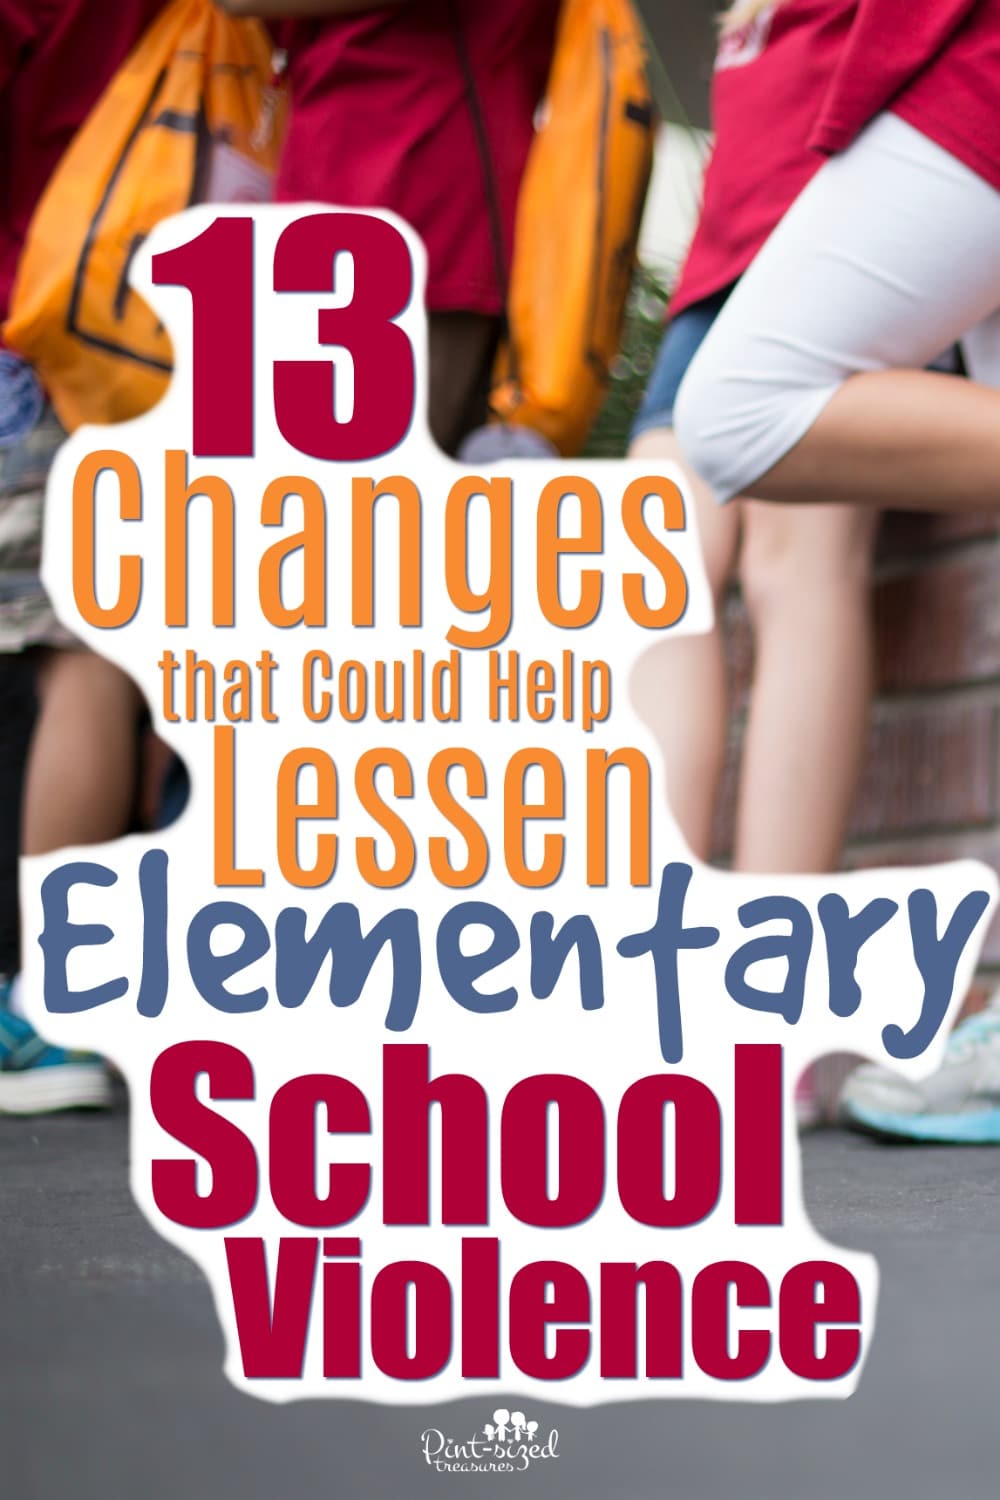 Violence in elementary schools should not even be happening. Our elementary schools should be a safe and peaceful place for teachers, students and staff. Could these 13 changes lessen elementary school violence? Some teachers say YES!